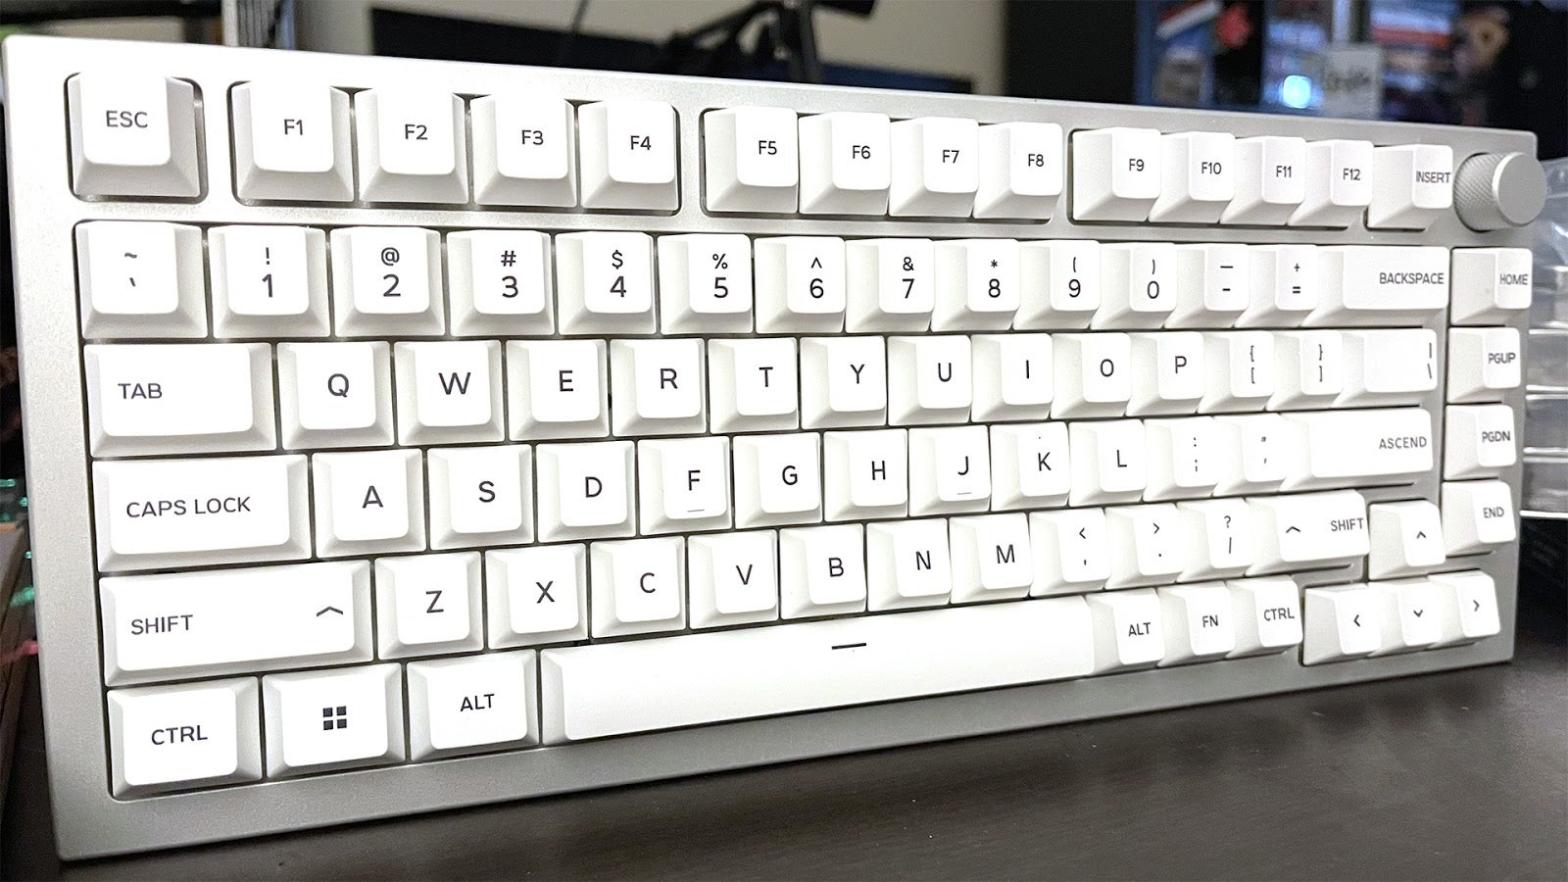 Complete with Glorious Panda switches and white ice keycaps. Mmmm.  (Photo: Mike Fahey / Kotaku)